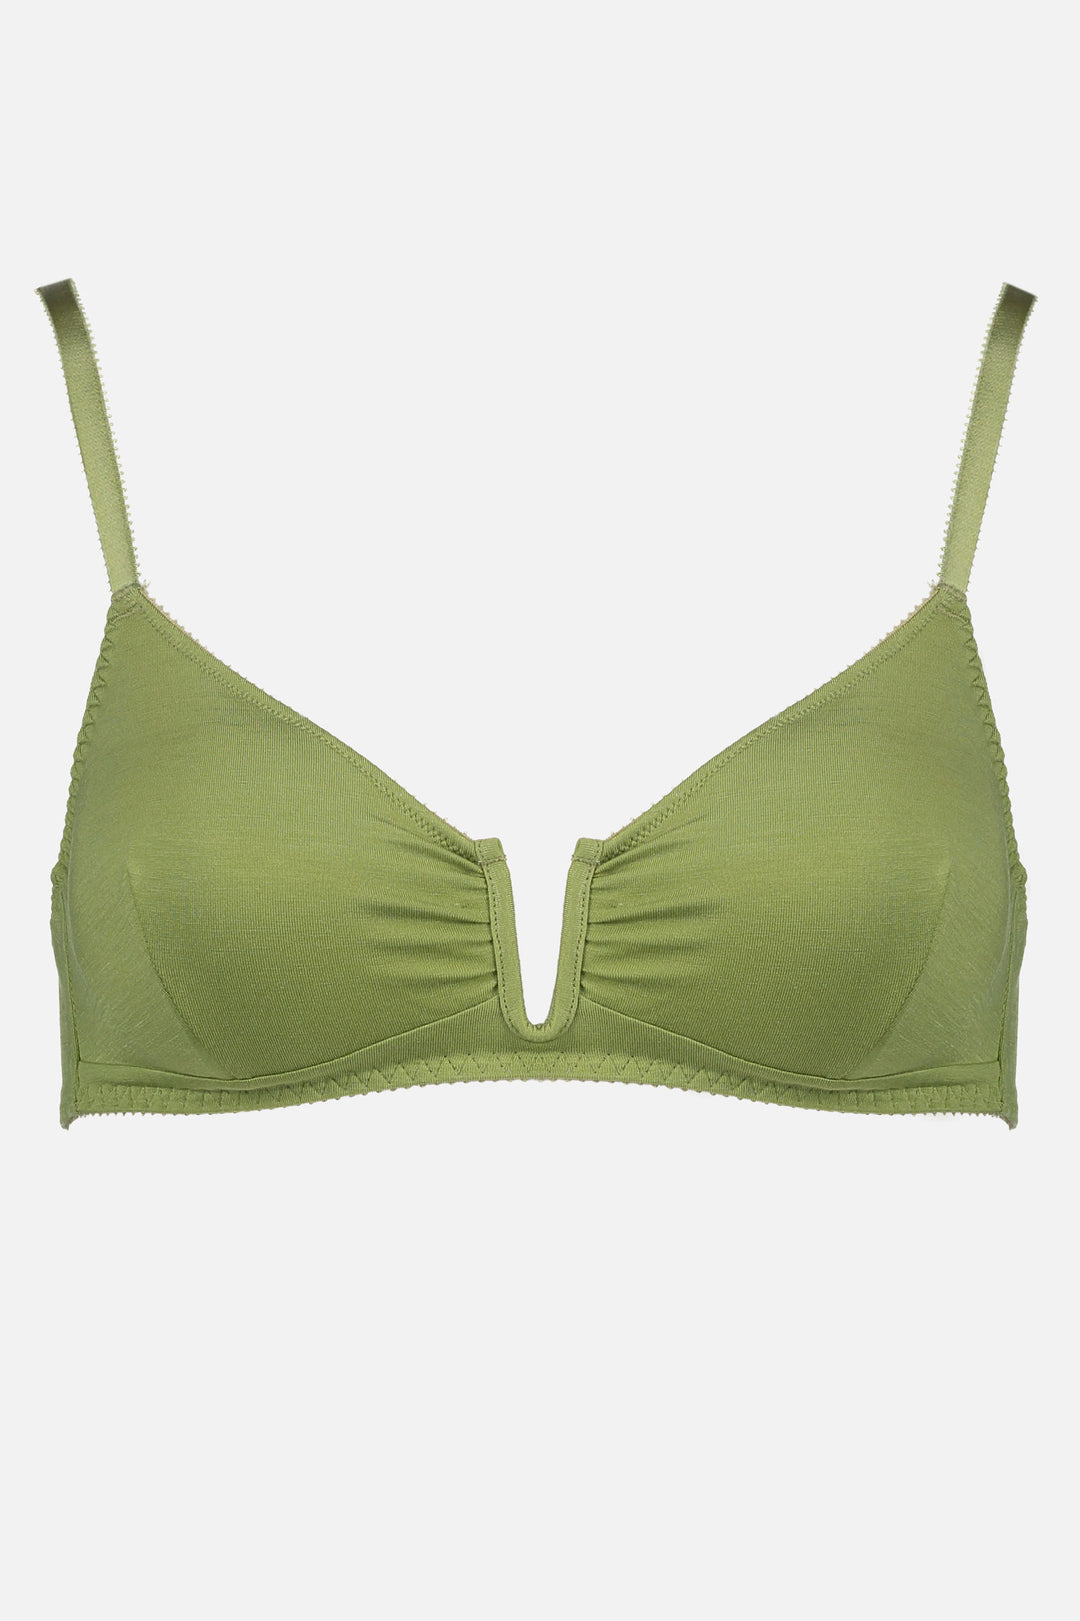 Videris Lingerie Angela underwire free soft cup bra in olive TENCEL™ has a triangle shaped cup and U wire in the front